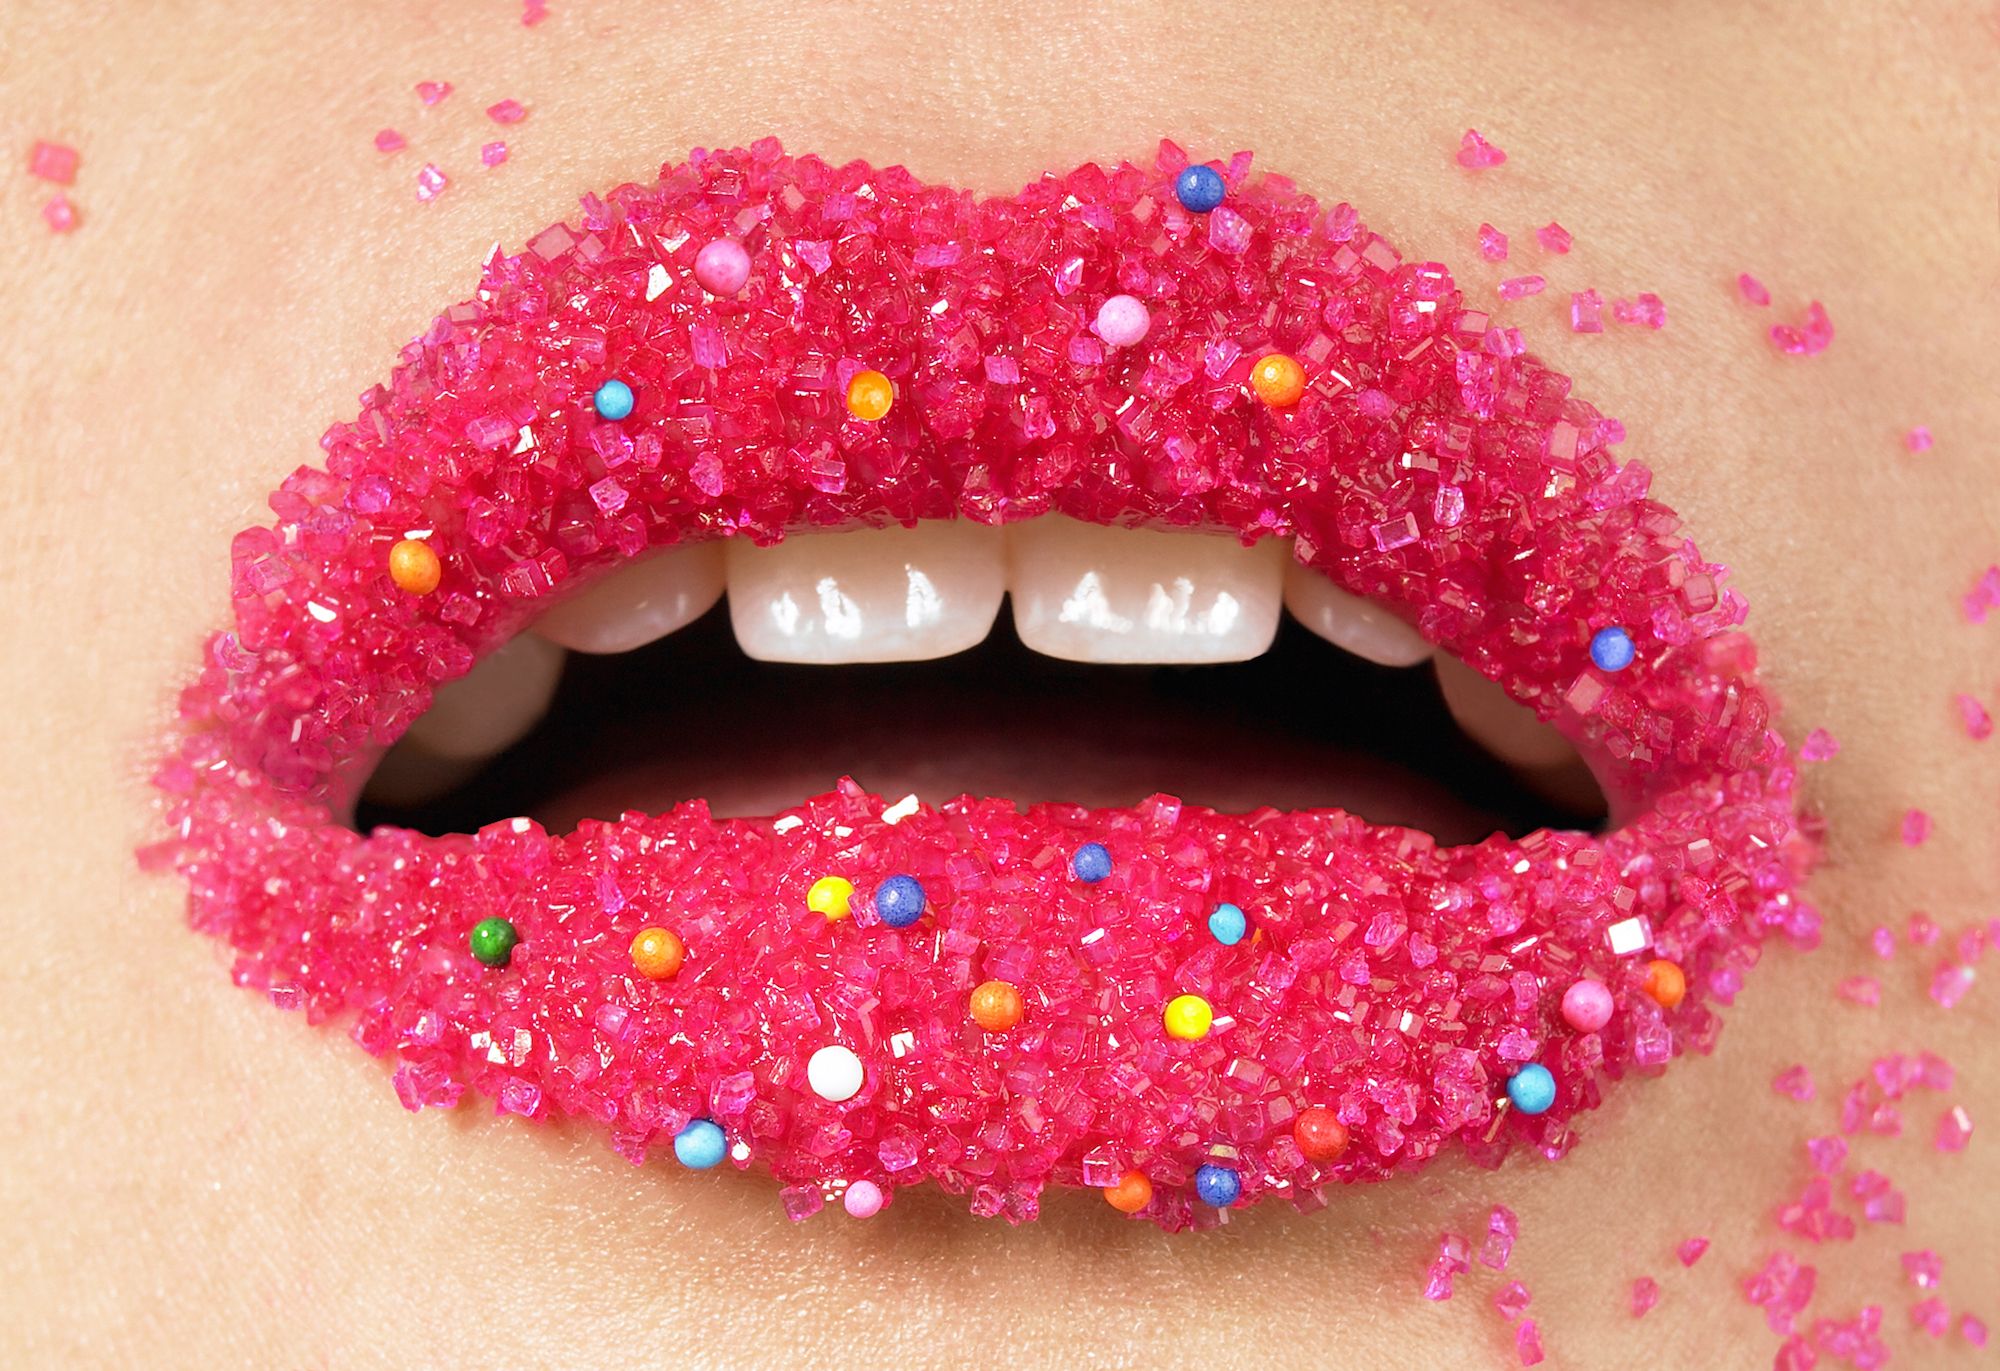 Pink Candy Lips with little candy balls